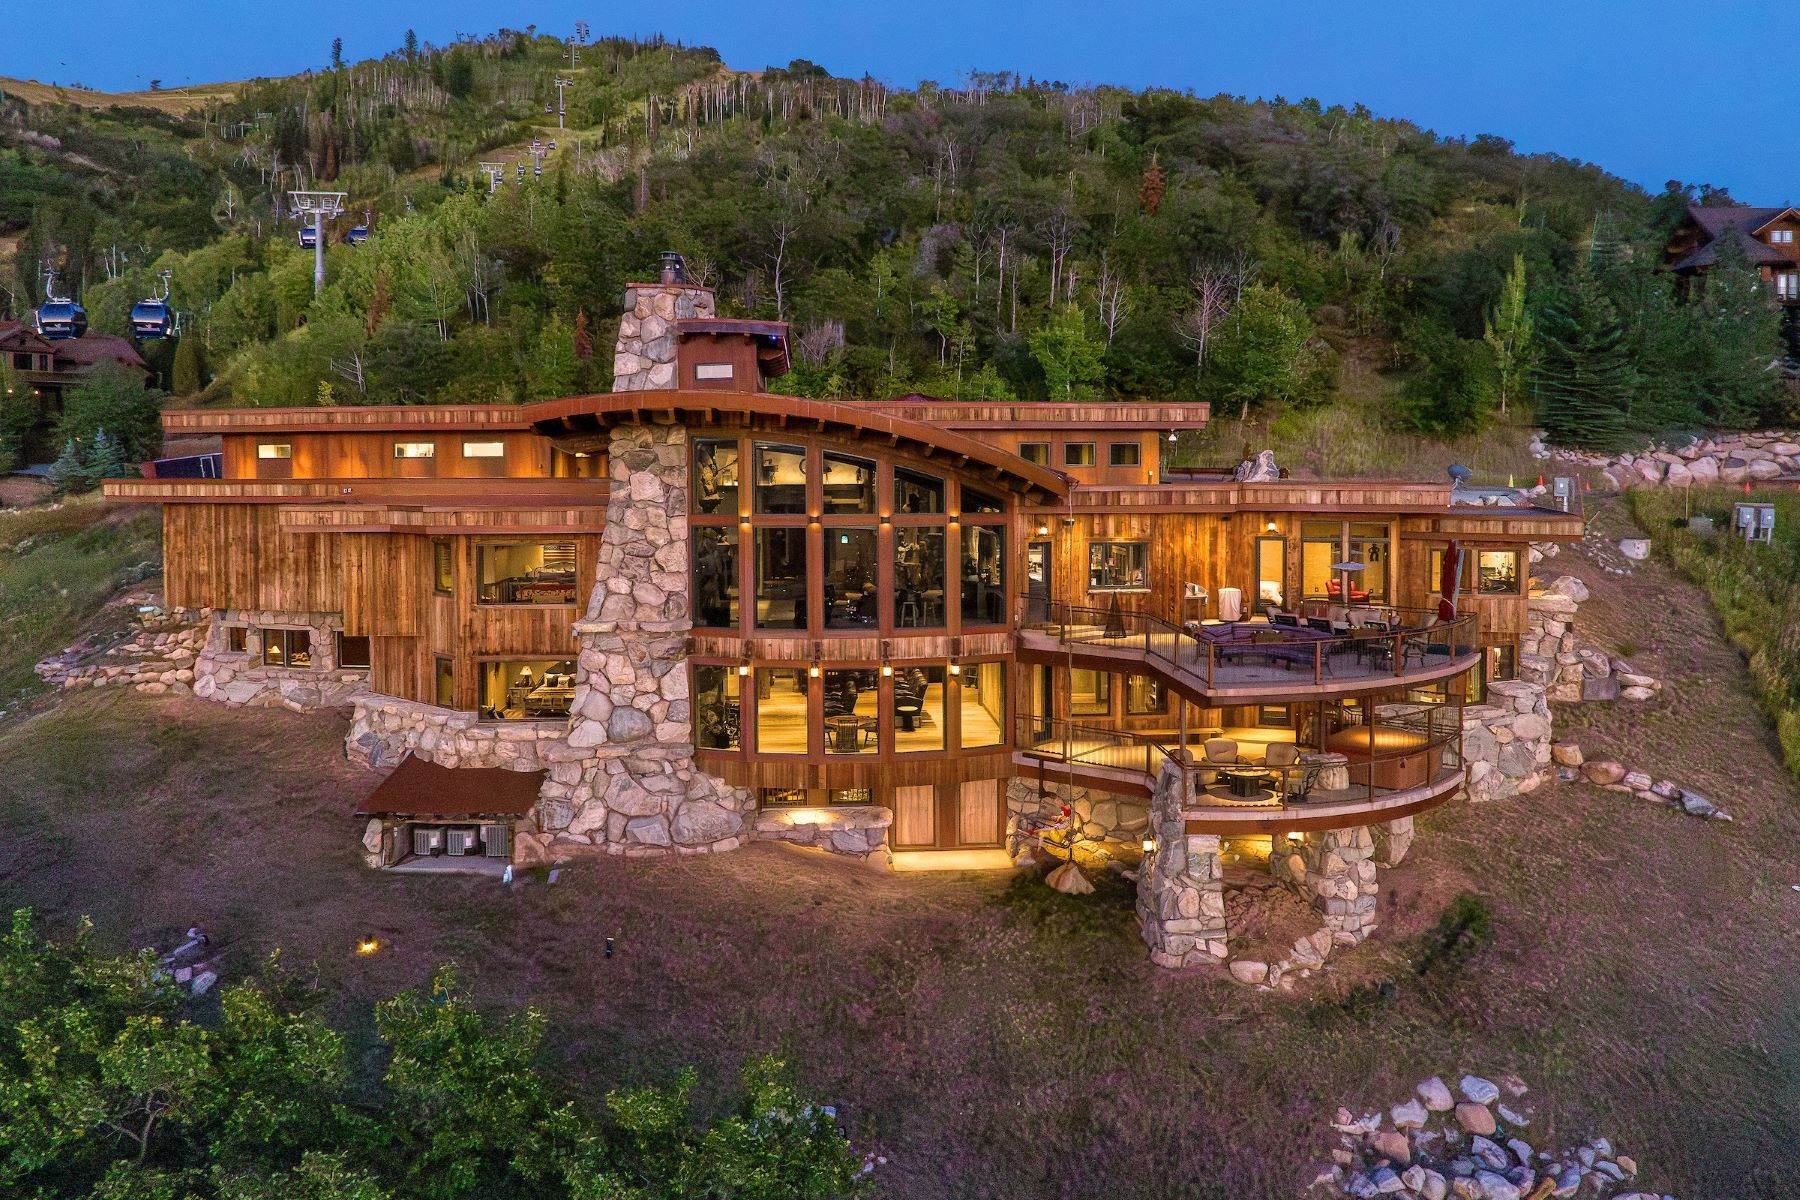 Property for Sale at Iconic Gondola Overlook 2555 Ski Trail Lane Steamboat Springs, Colorado 80487 United States